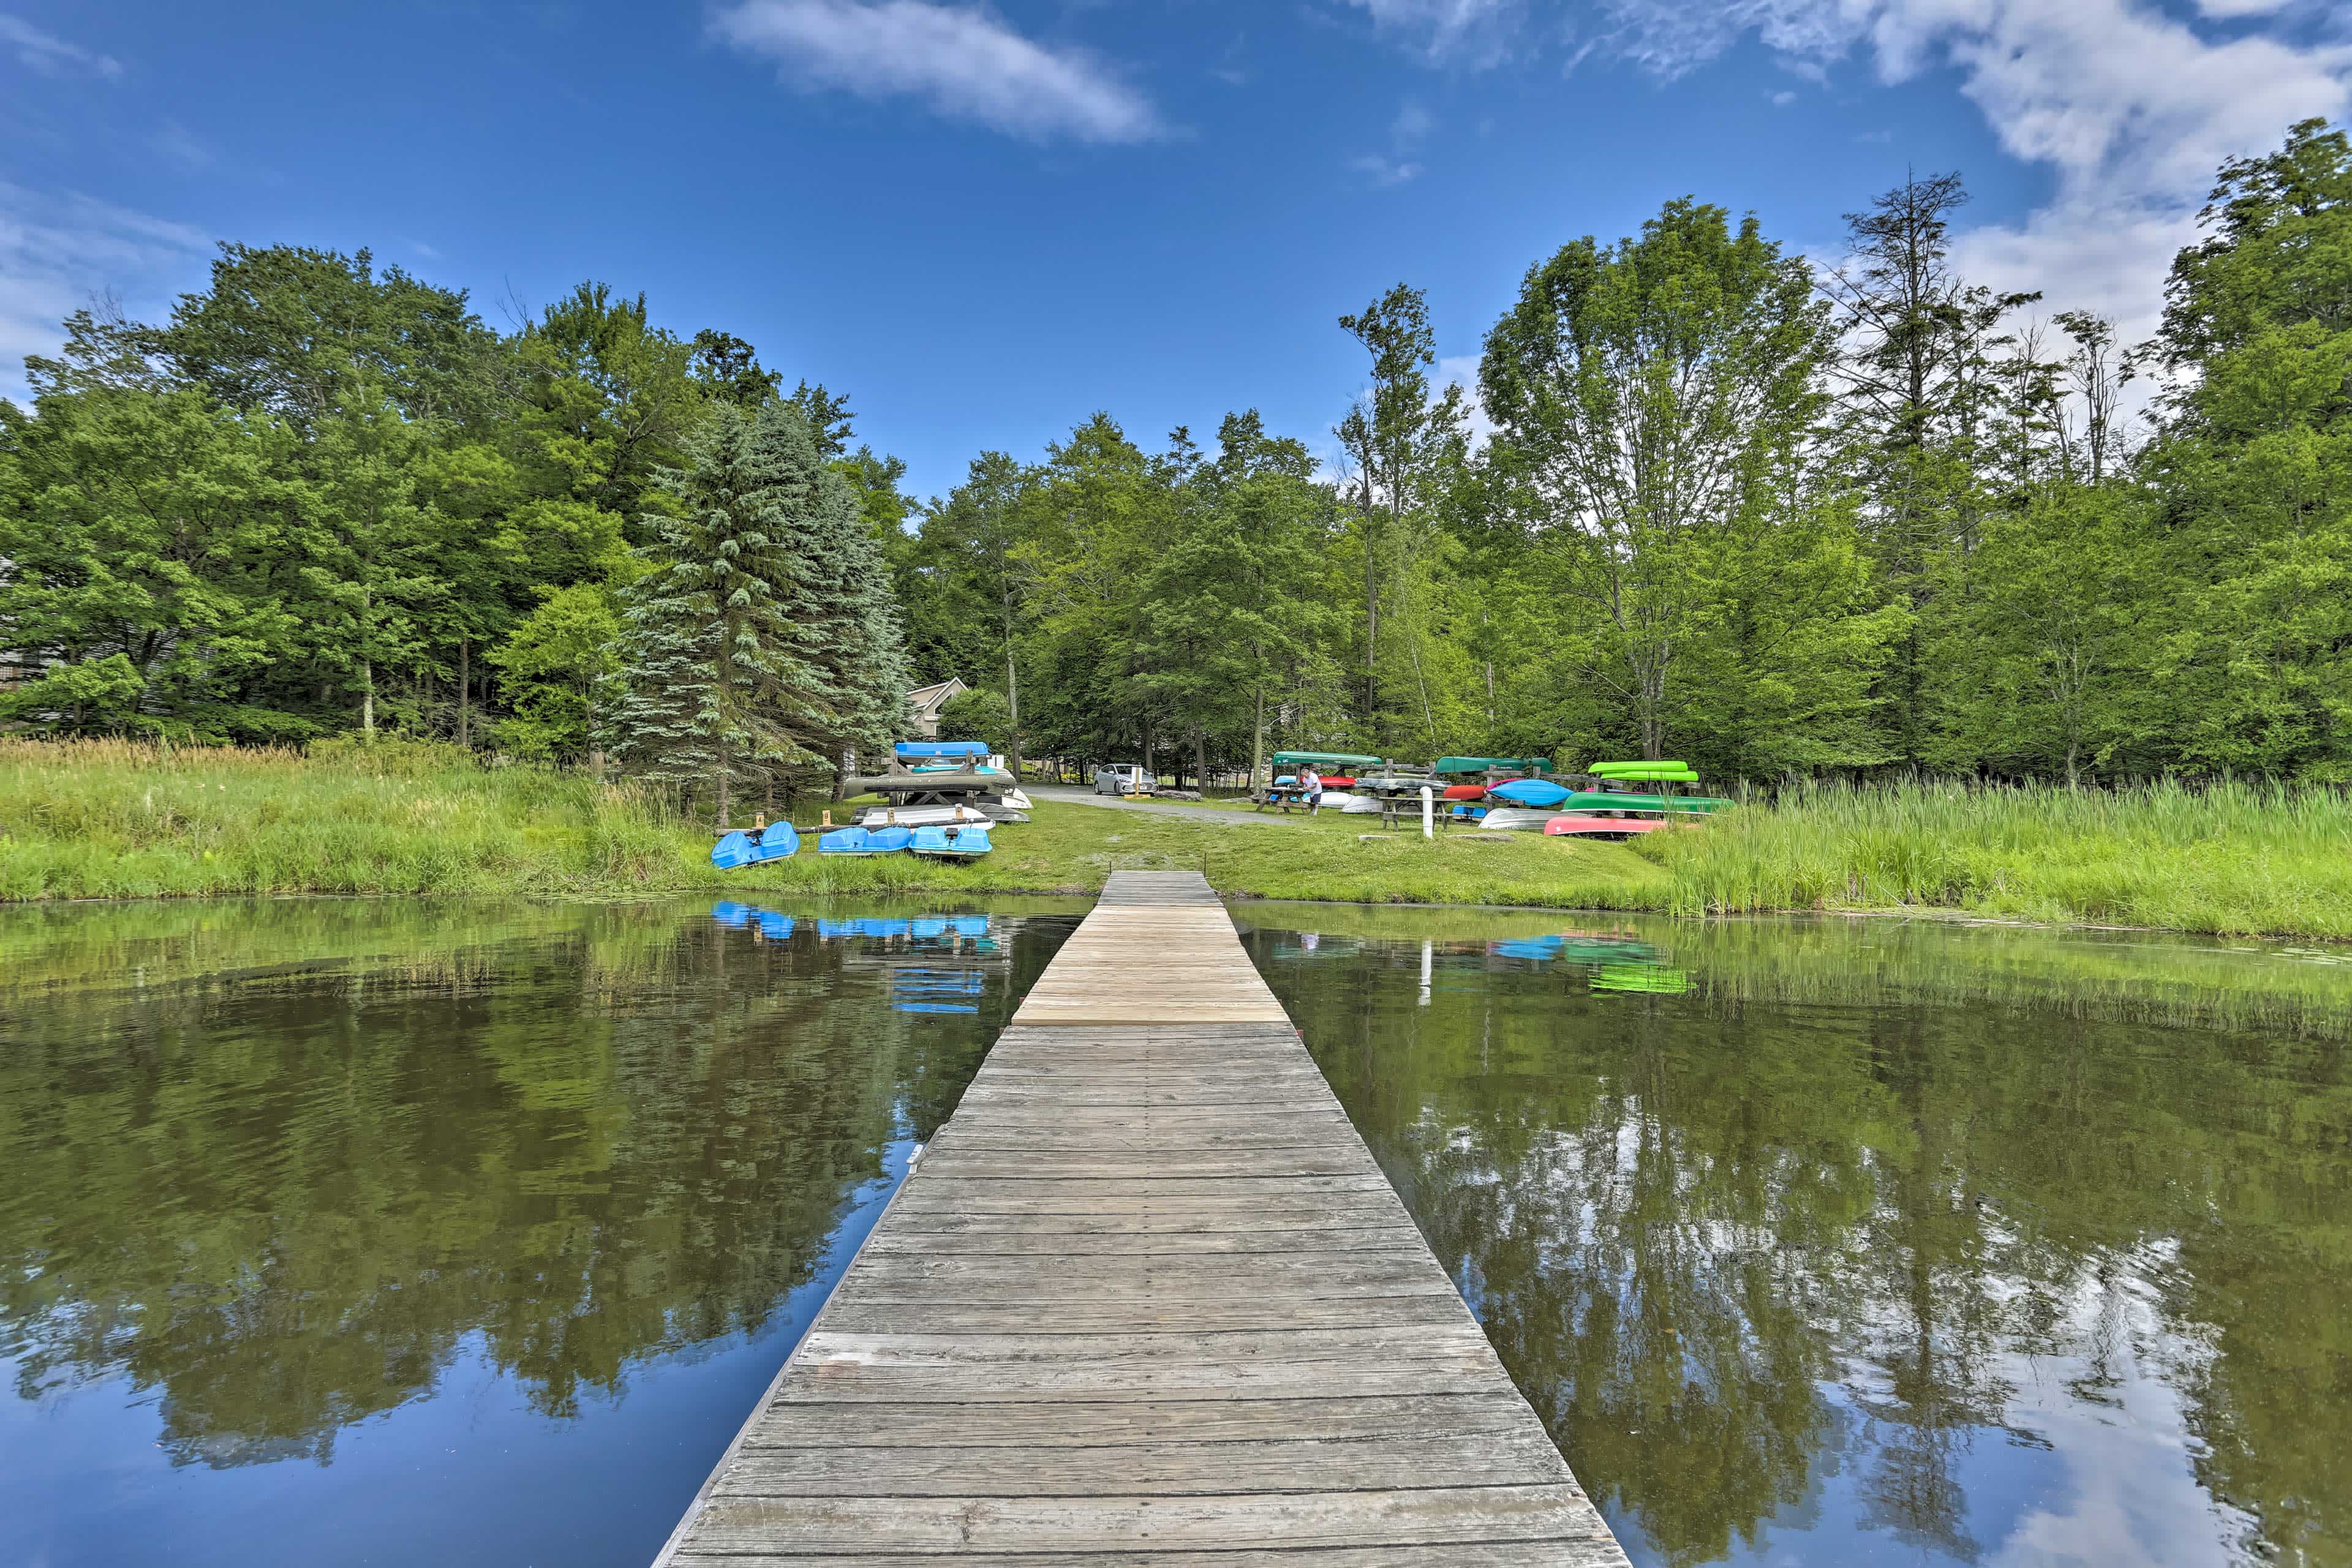 View from the end of a wooden dock in Lake Ariel, PA looking in at a shore with canoes